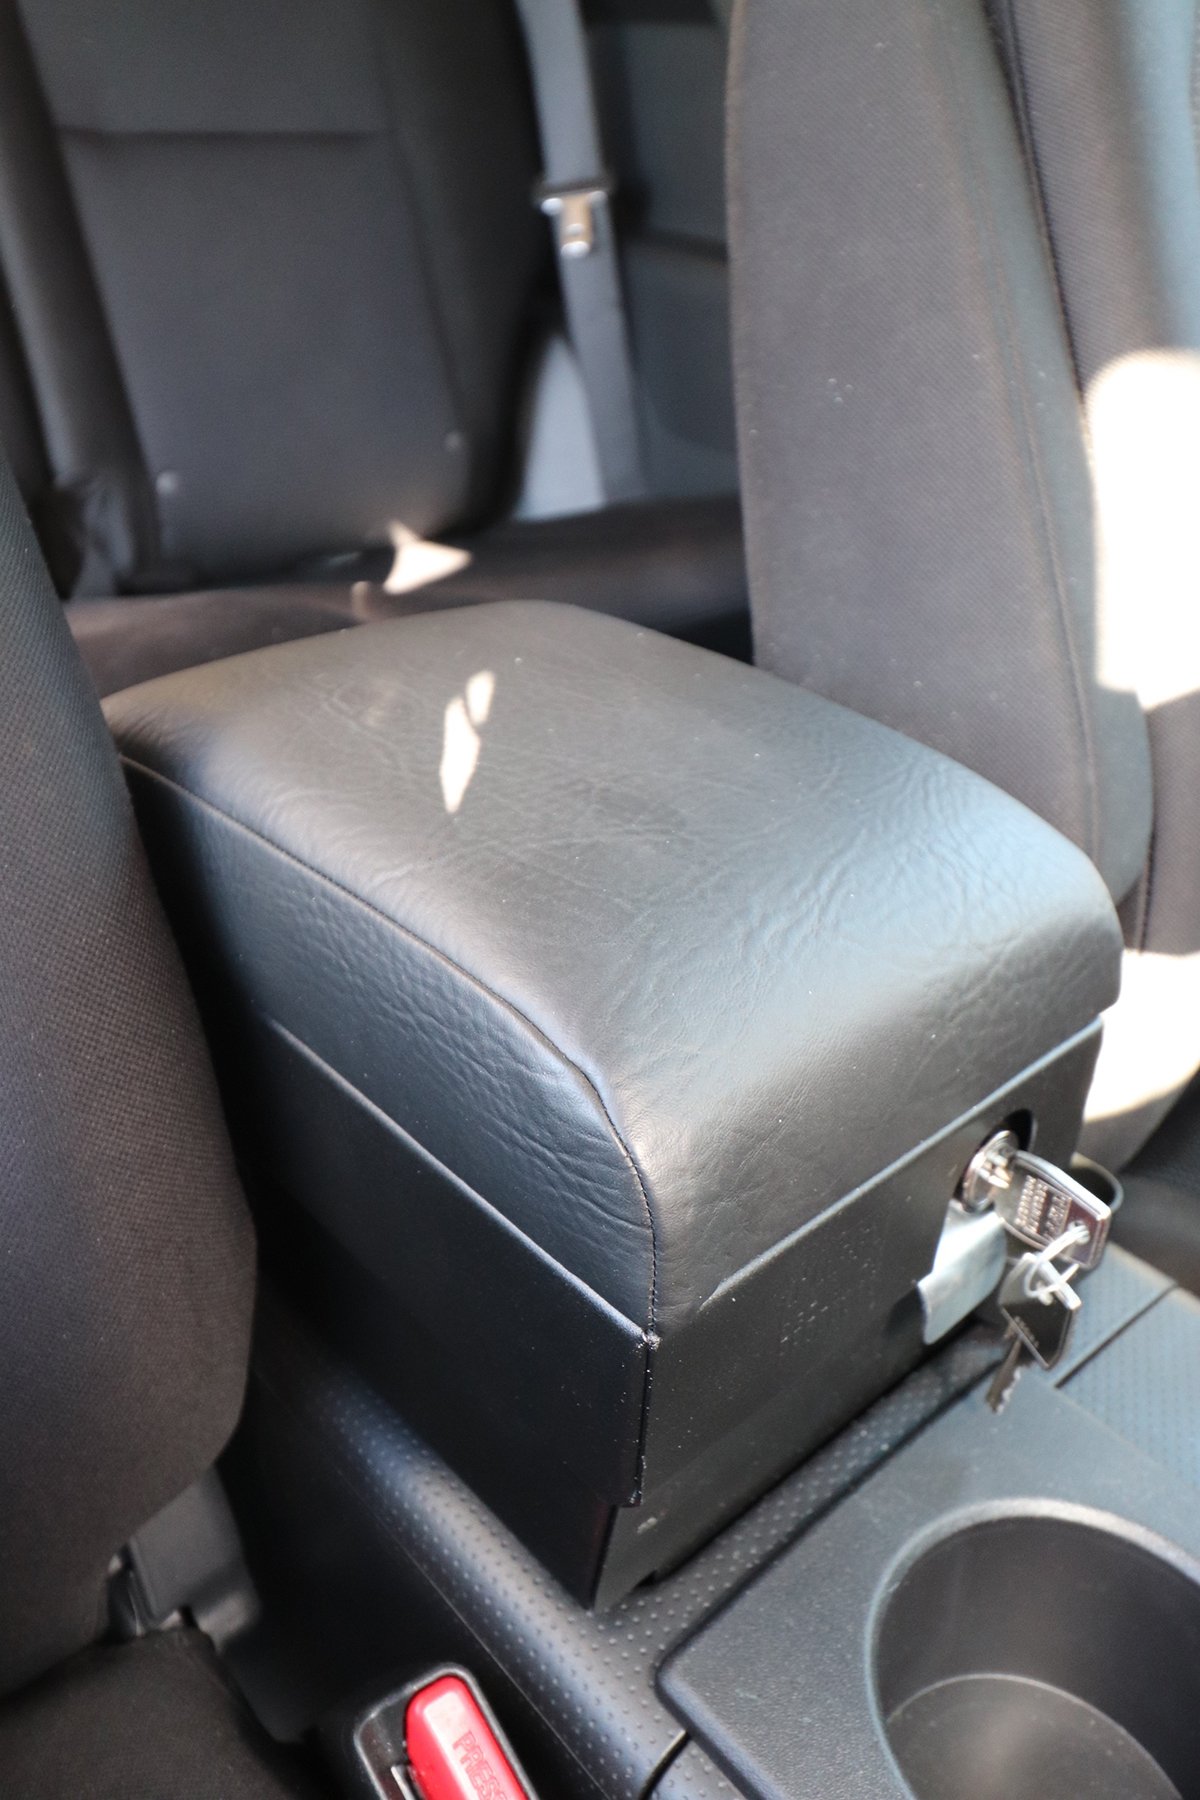 Installed Console Safe to Reduce Vehicle Break-Ins